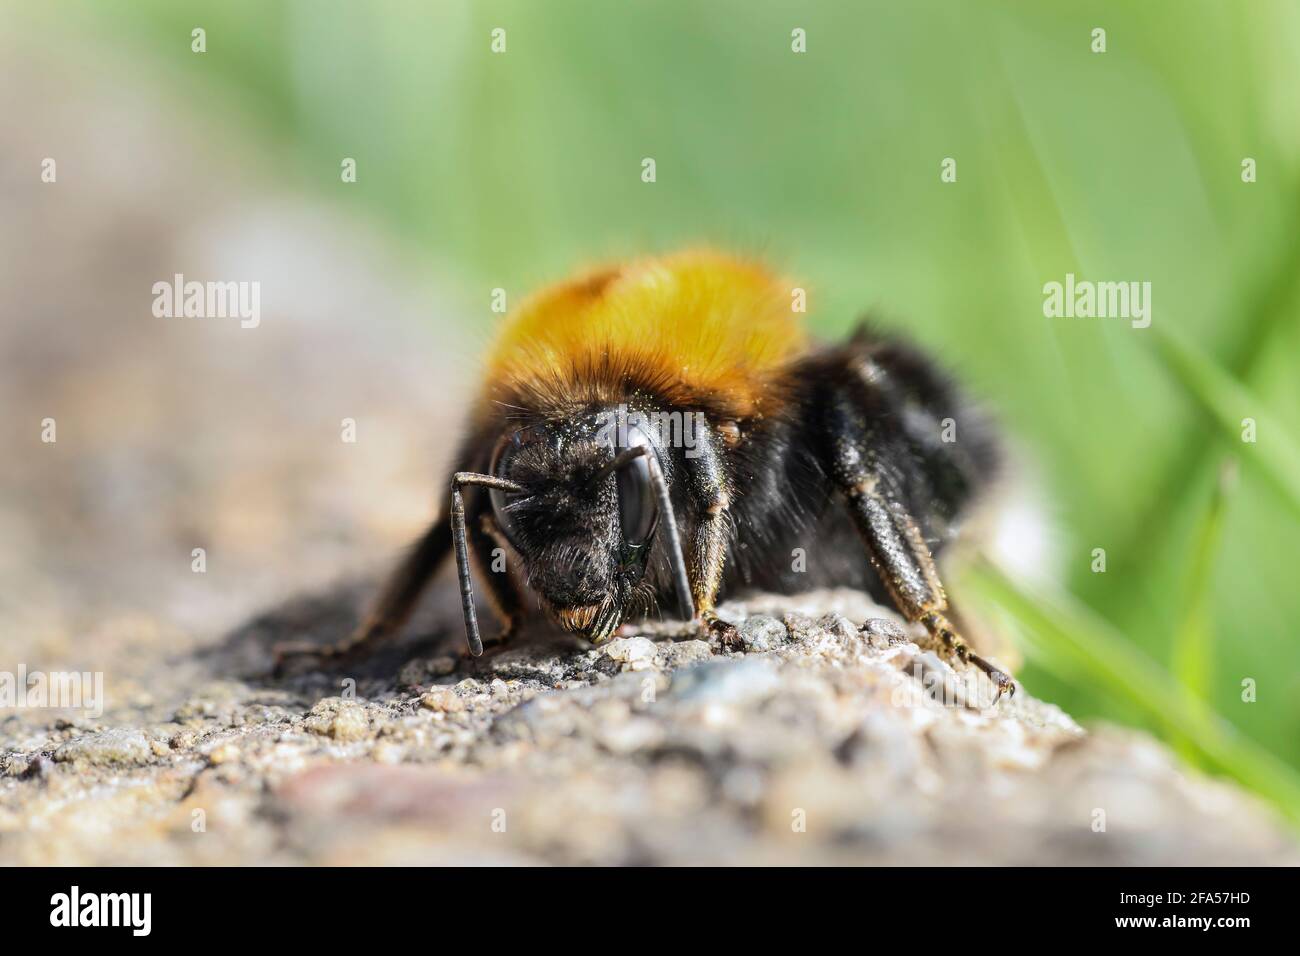 Queen Tree Bumble Bee (Bombus hypnorum) Warming up in the Sun, Teesdale, County Durham, UK Stock Photo